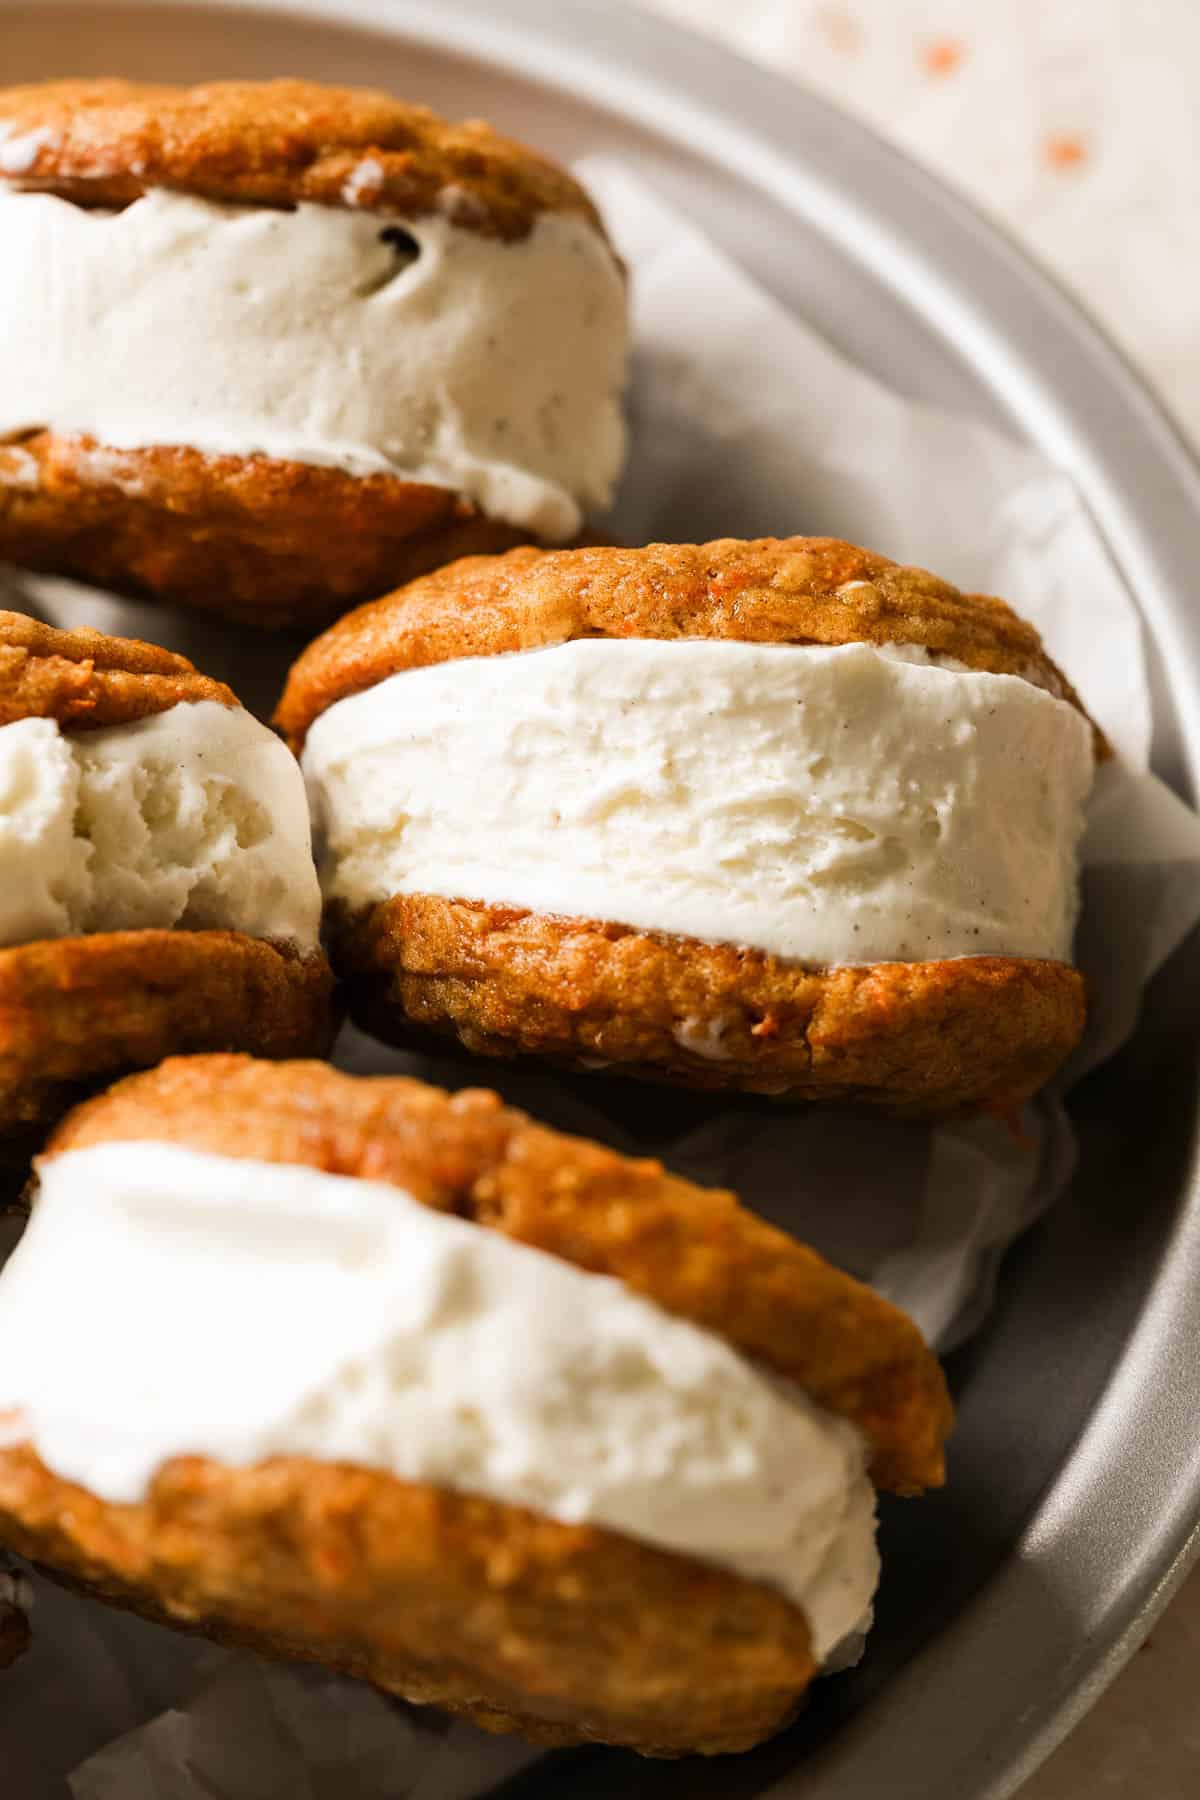 ice cream sandwiches made with carrot cake cookies. 